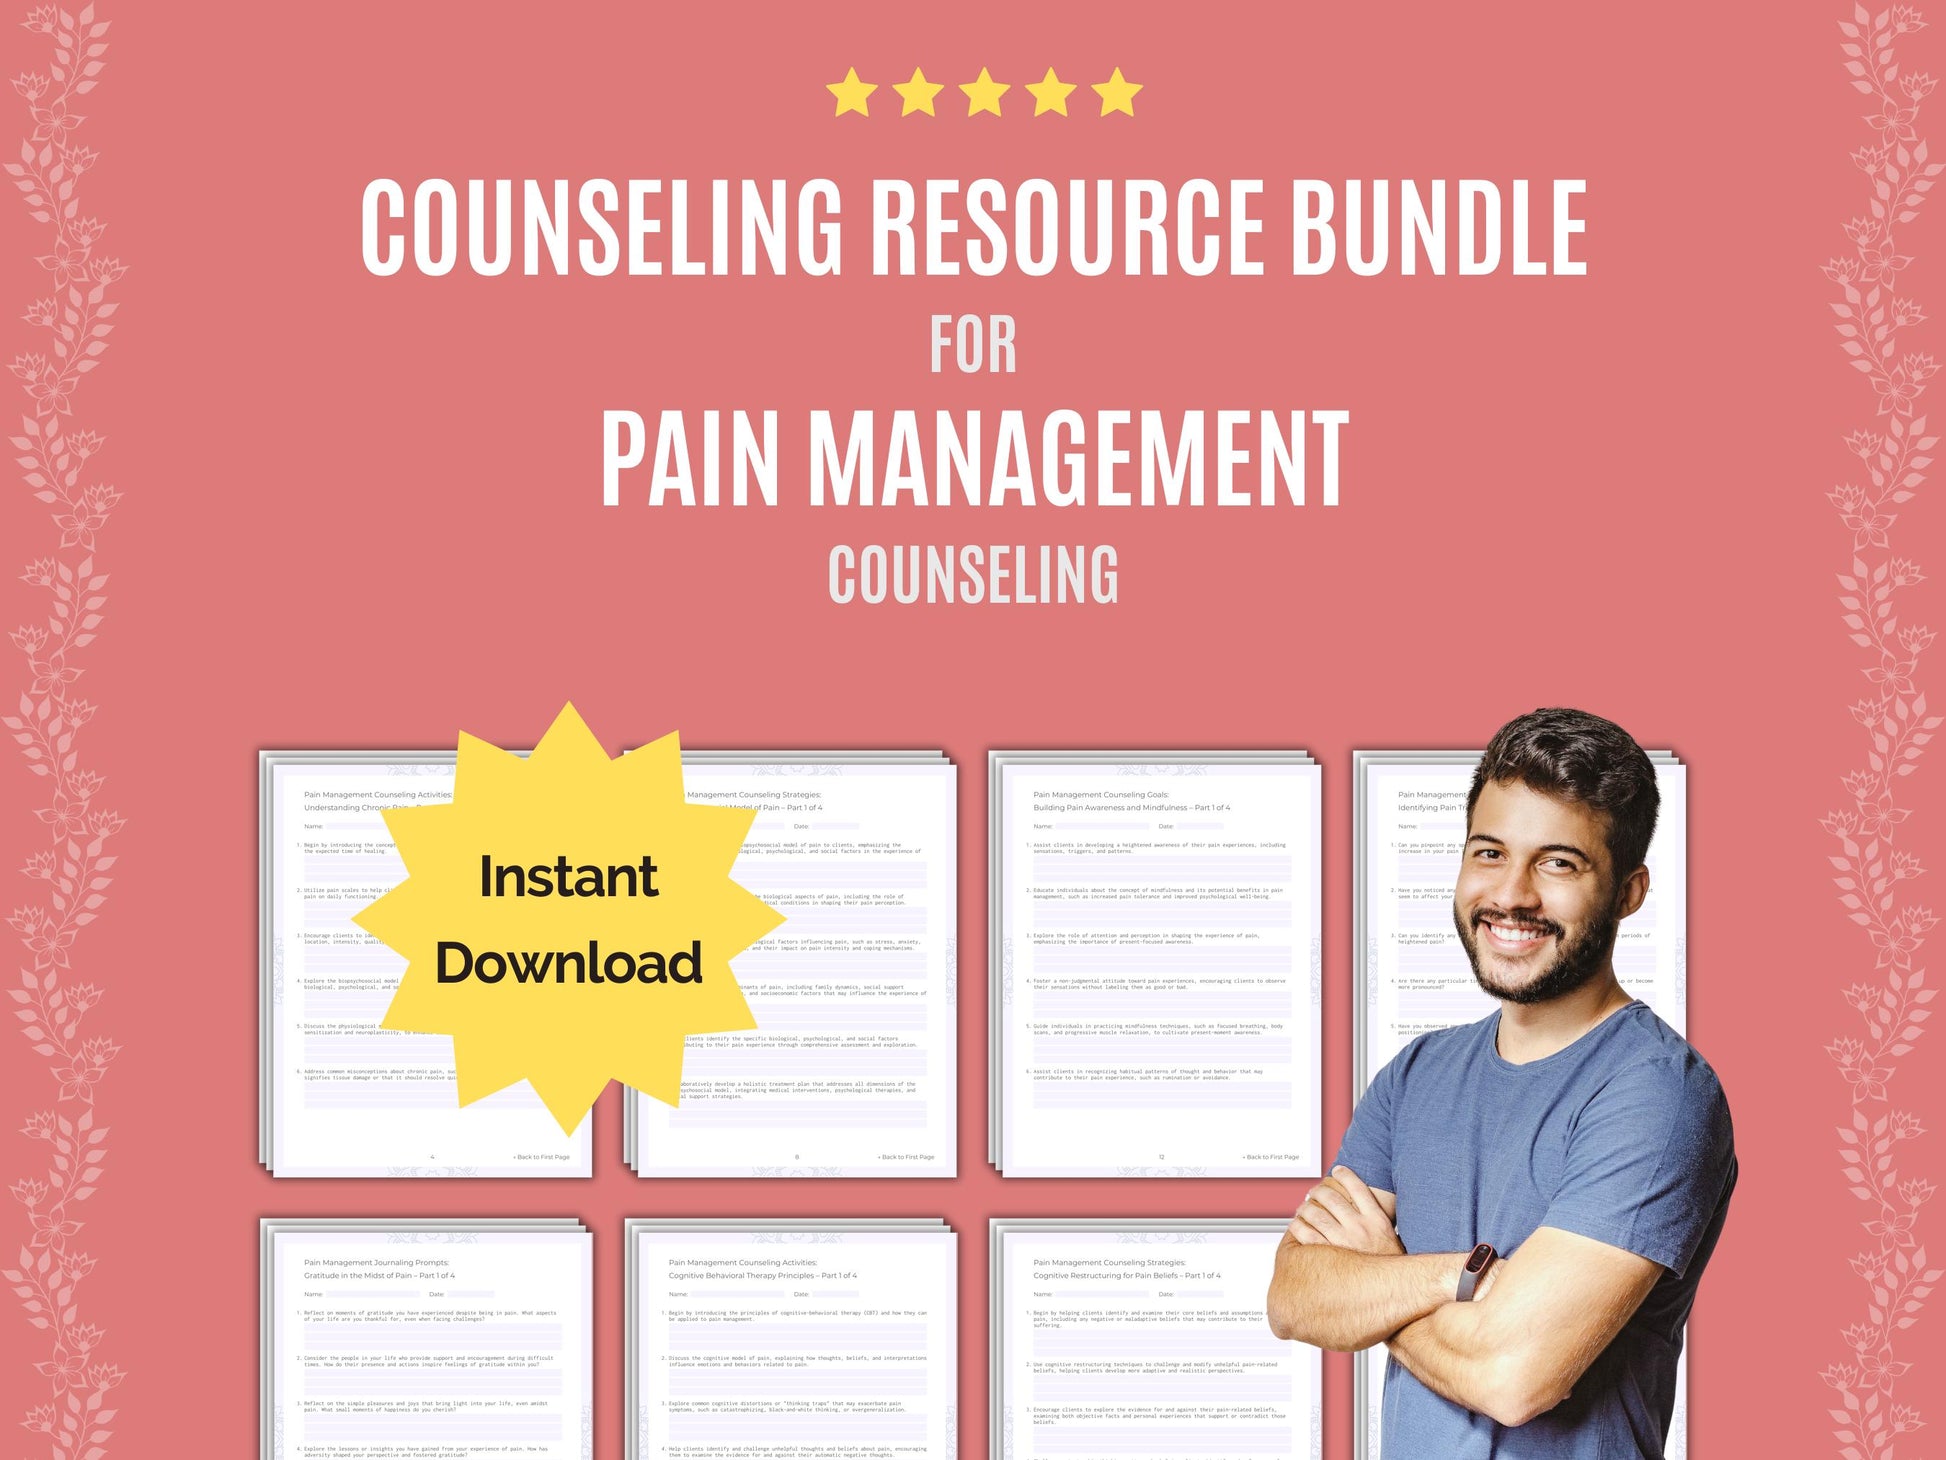 Pain Workbook, Pain Tool, Pain Worksheet, Pain Template, Management, Counselor, Therapist, Mental Health, Pain Resource, Pain Therapy, Pain Idea, Pain Counseling, Pain Bundle